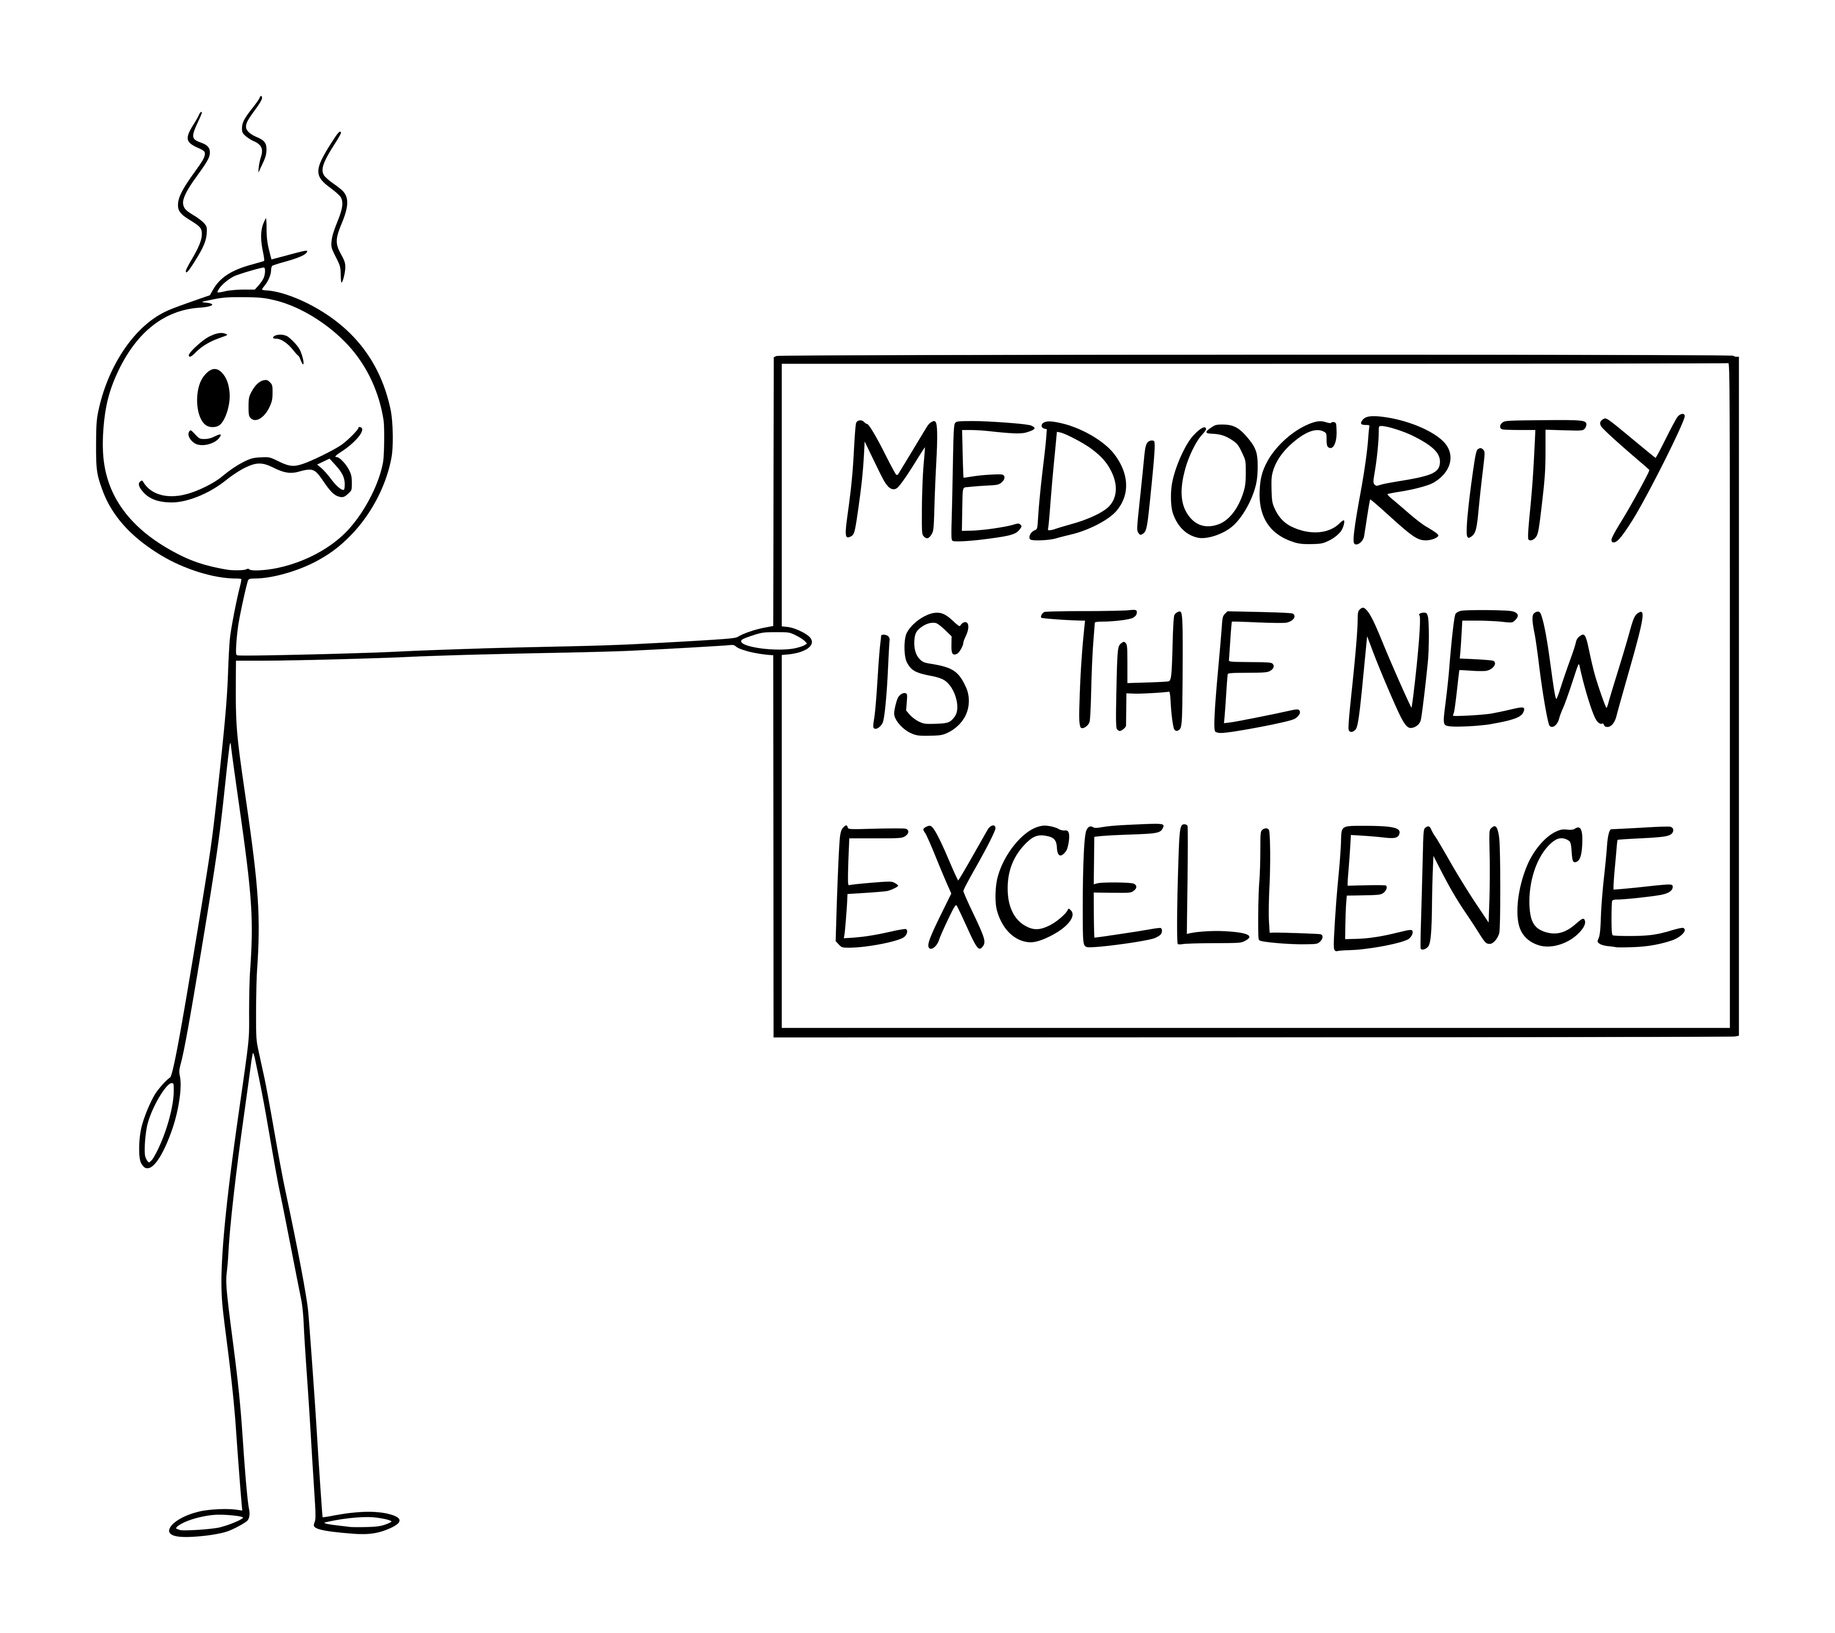 Image to represent Are we facing a meteoric rise in mediocrity?